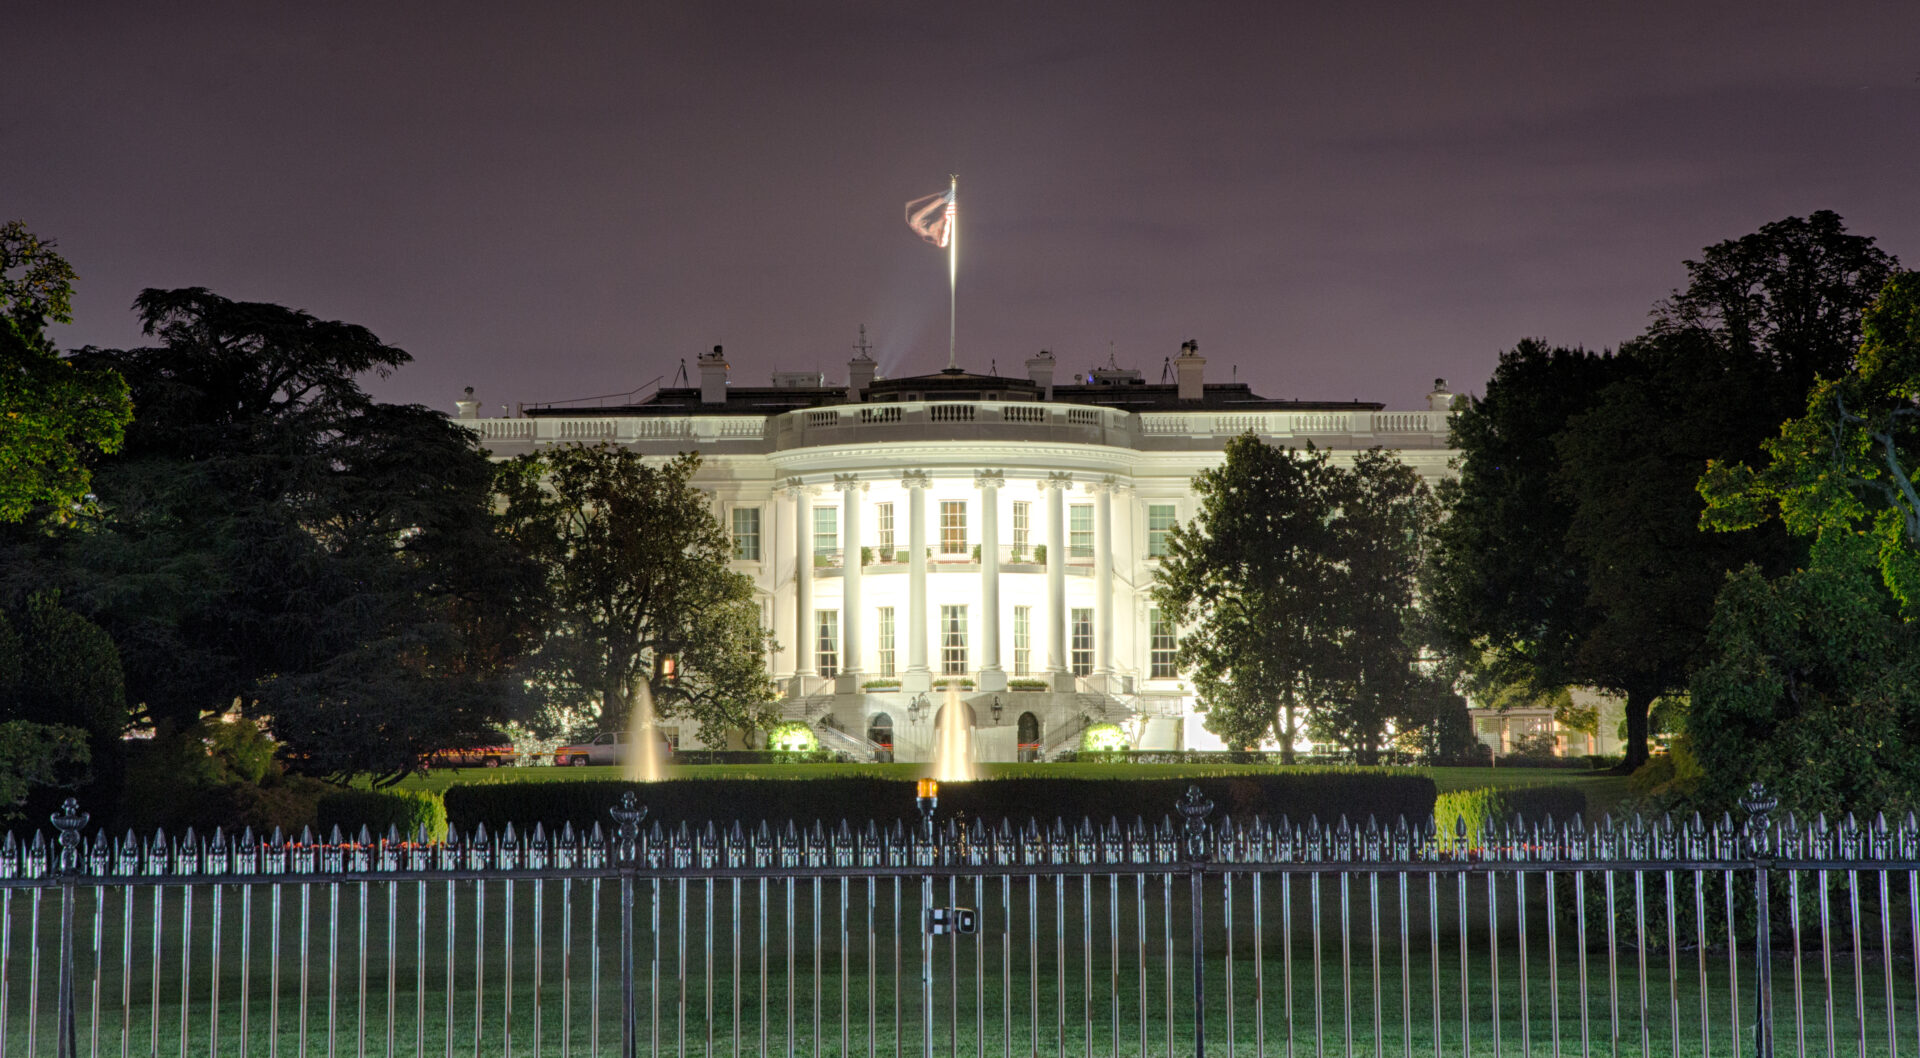 September 12, 2017, Washington, DC, USA: The White House at night during the Trump Administration.